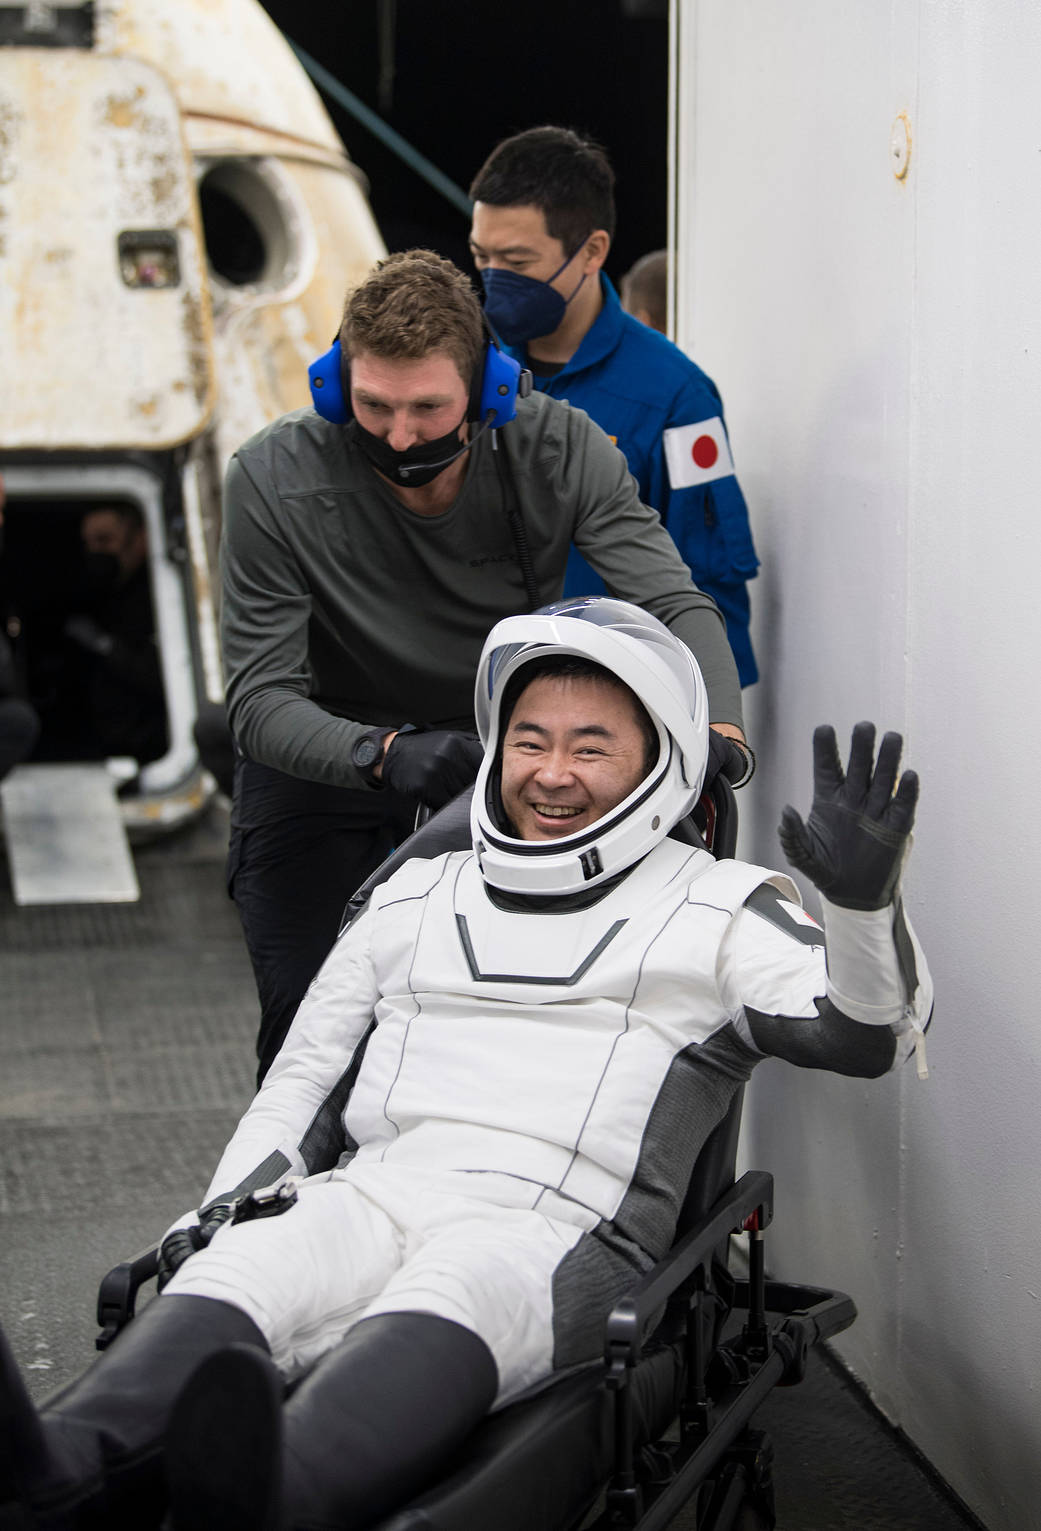 SpaceX Crew-2 astronaut Akihiko Hoshide after exiting Endeavour